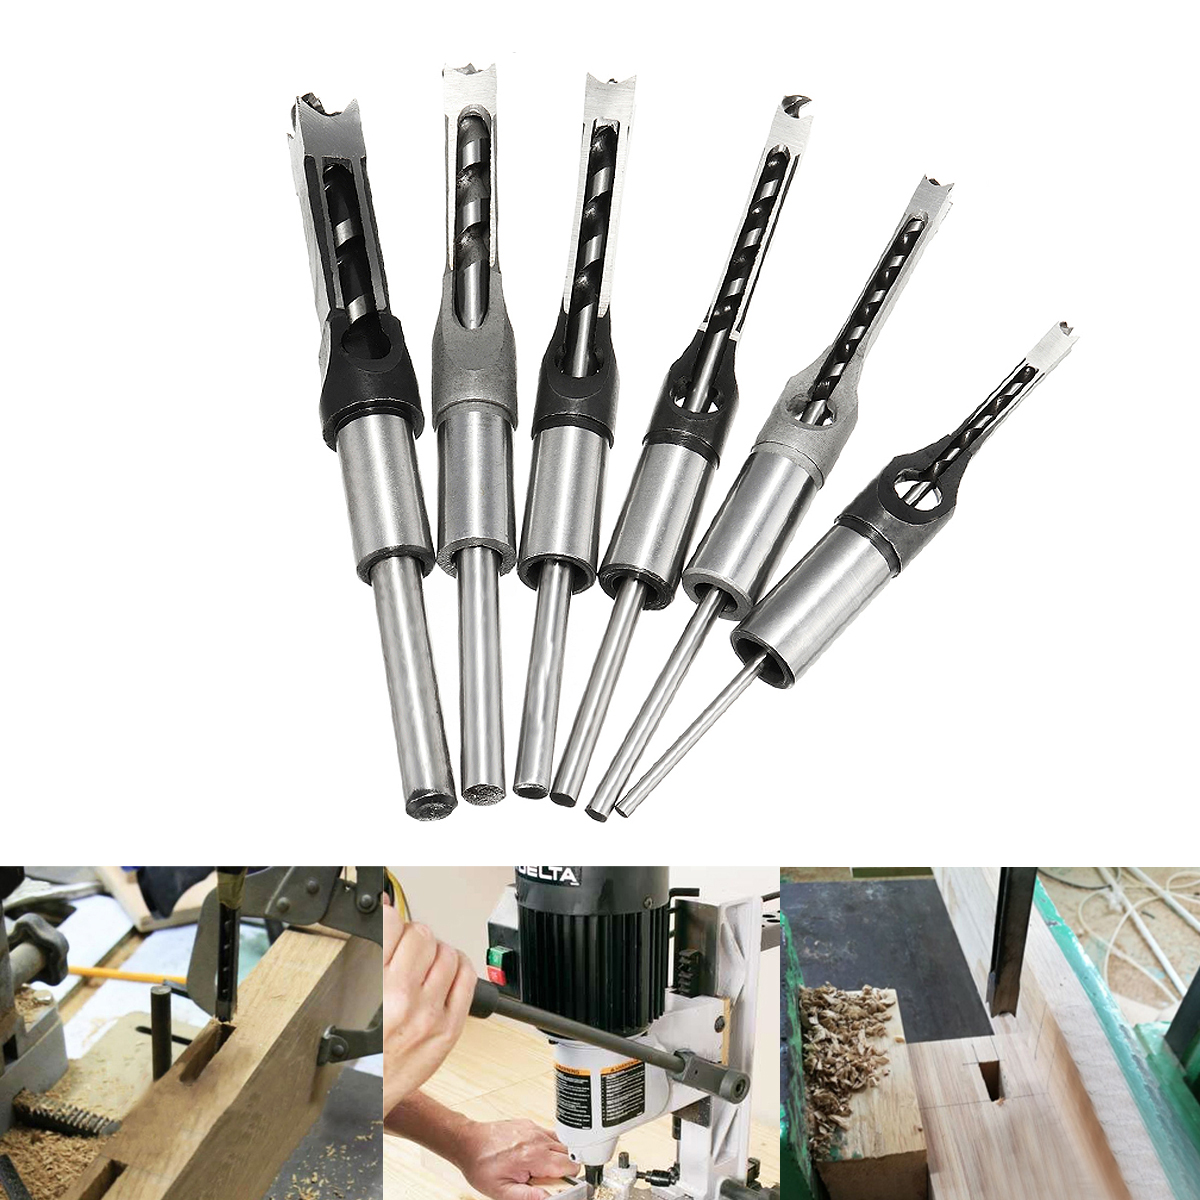 

6pcs 6-16mm Woodworking Square Hole Drill Bit Set Mortising Chisel Auger Drill 6/8/9.5/12.7/14/16mm